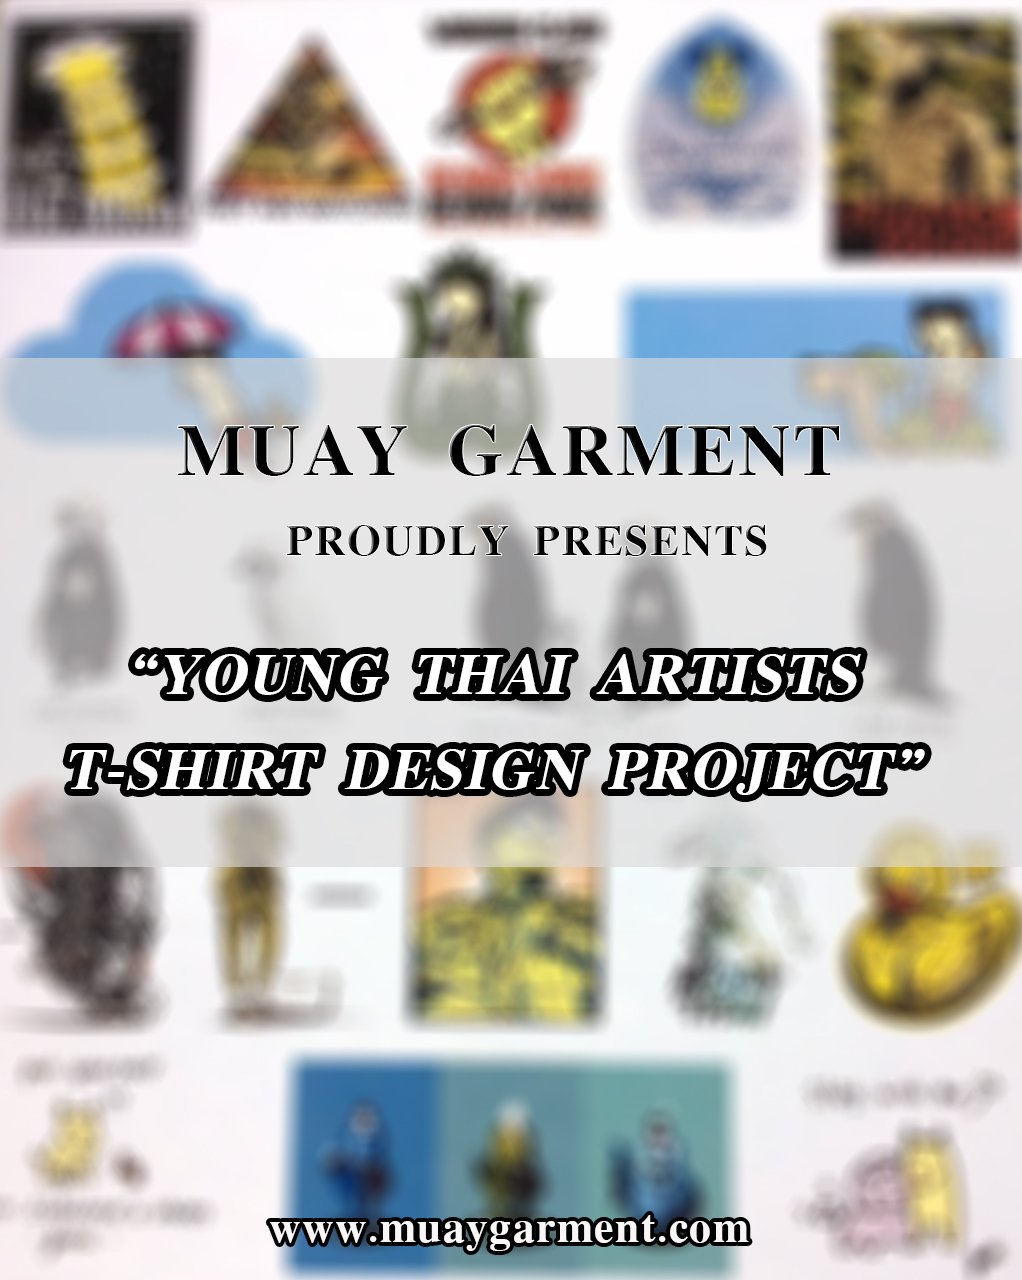 Young Thai Artists, T-shirt Design Project